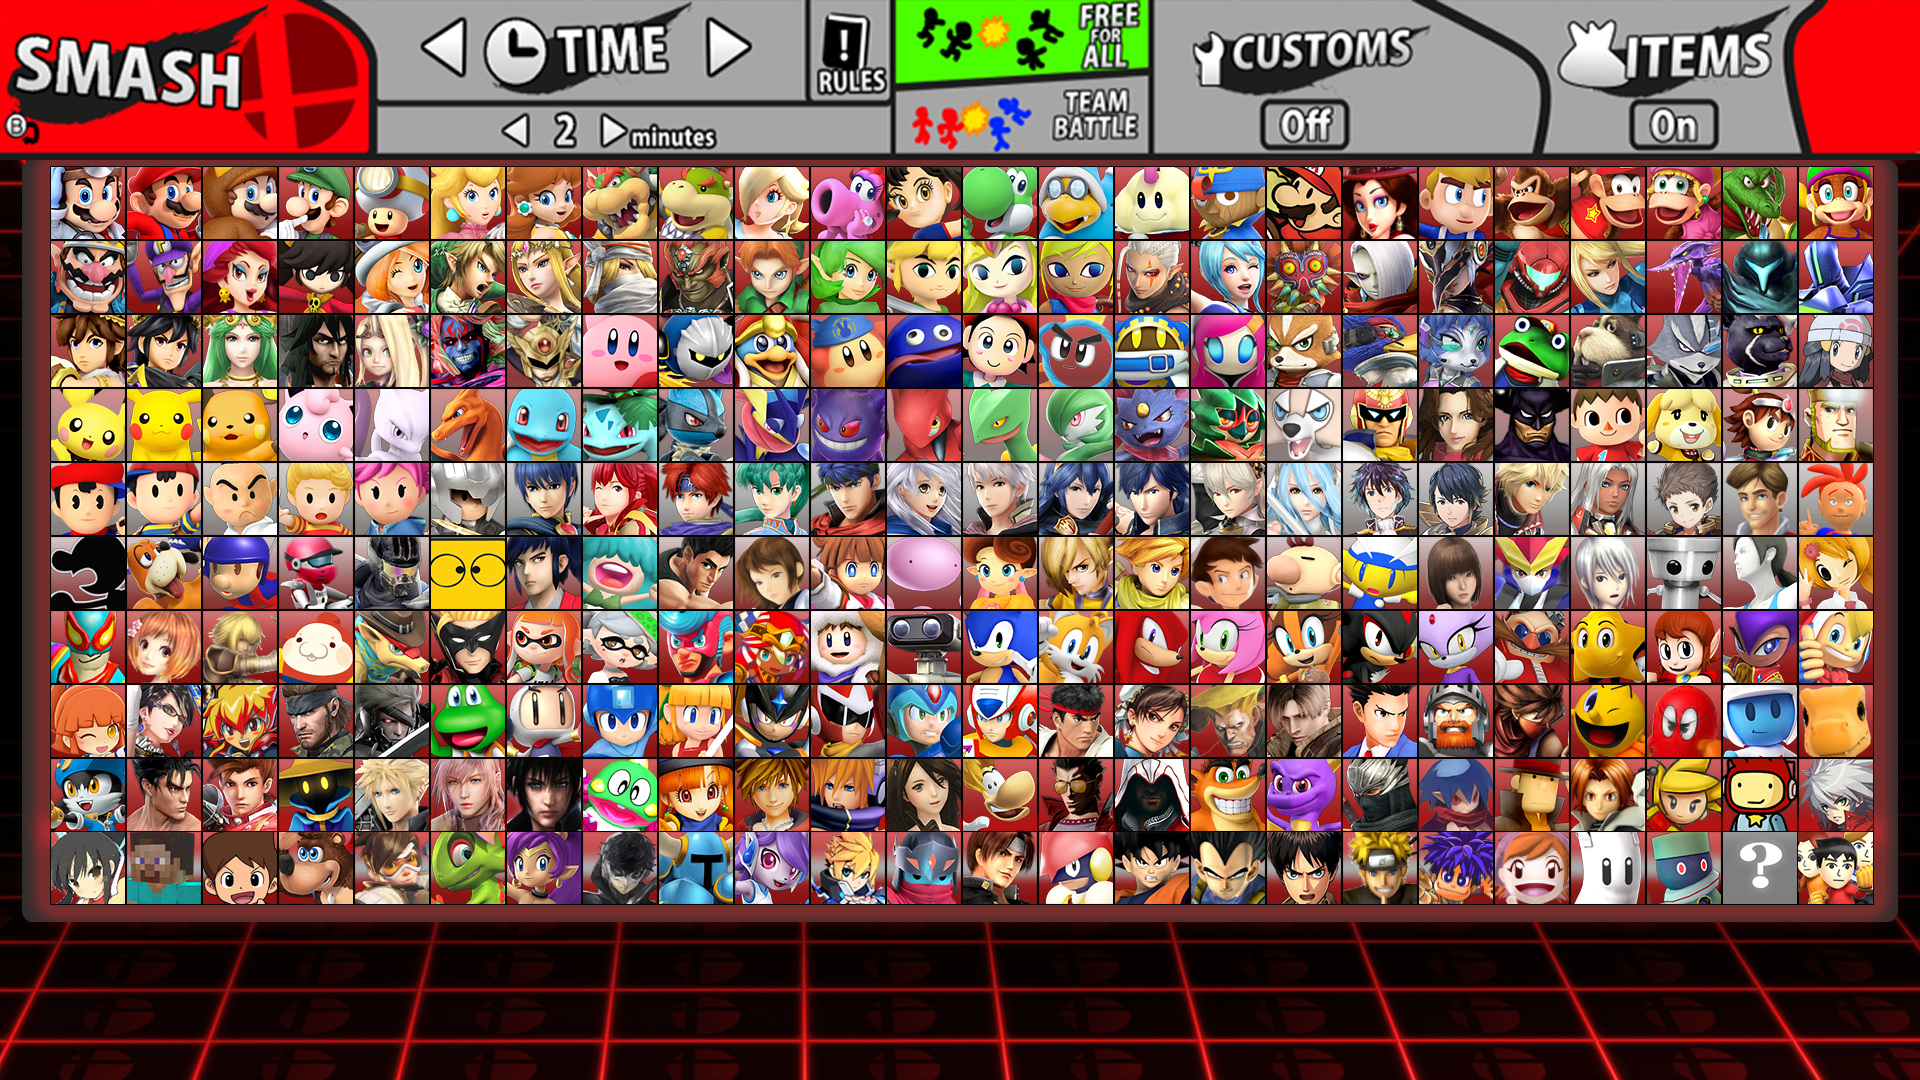 how to unlock all character in super smash bros ultimate world of light